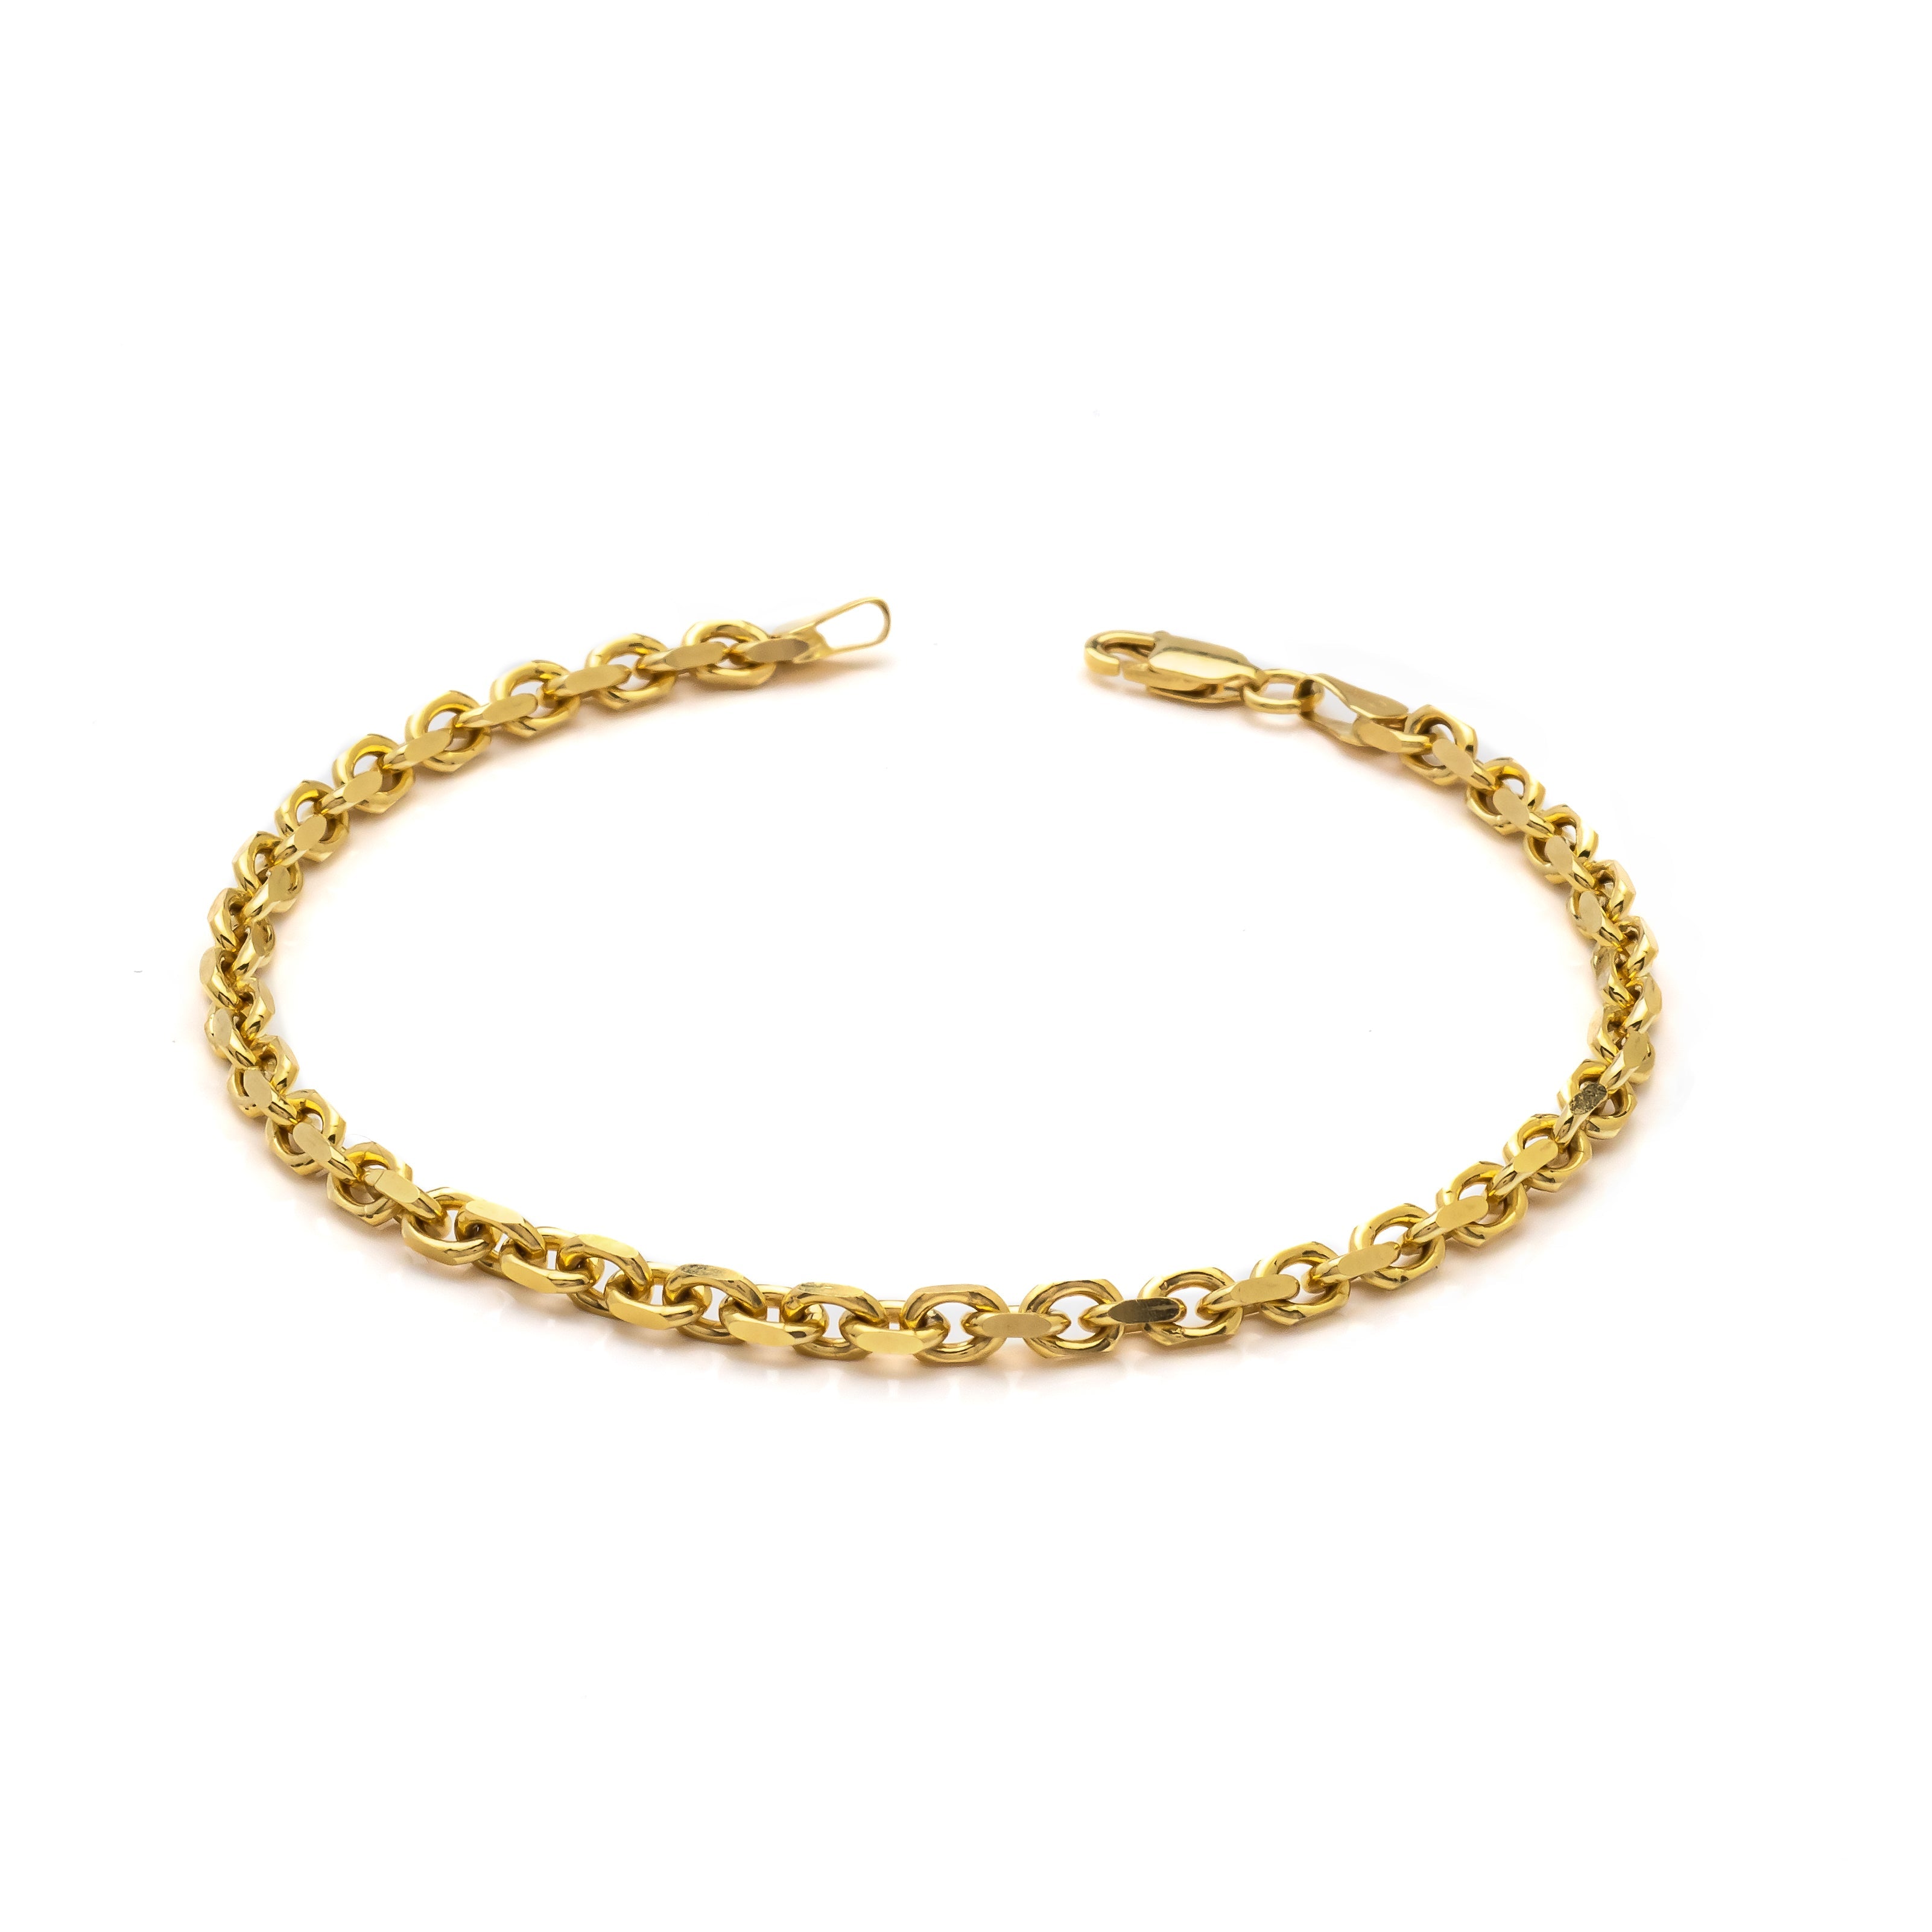 10k Yellow Gold Heavy Weight Cable Bracelet